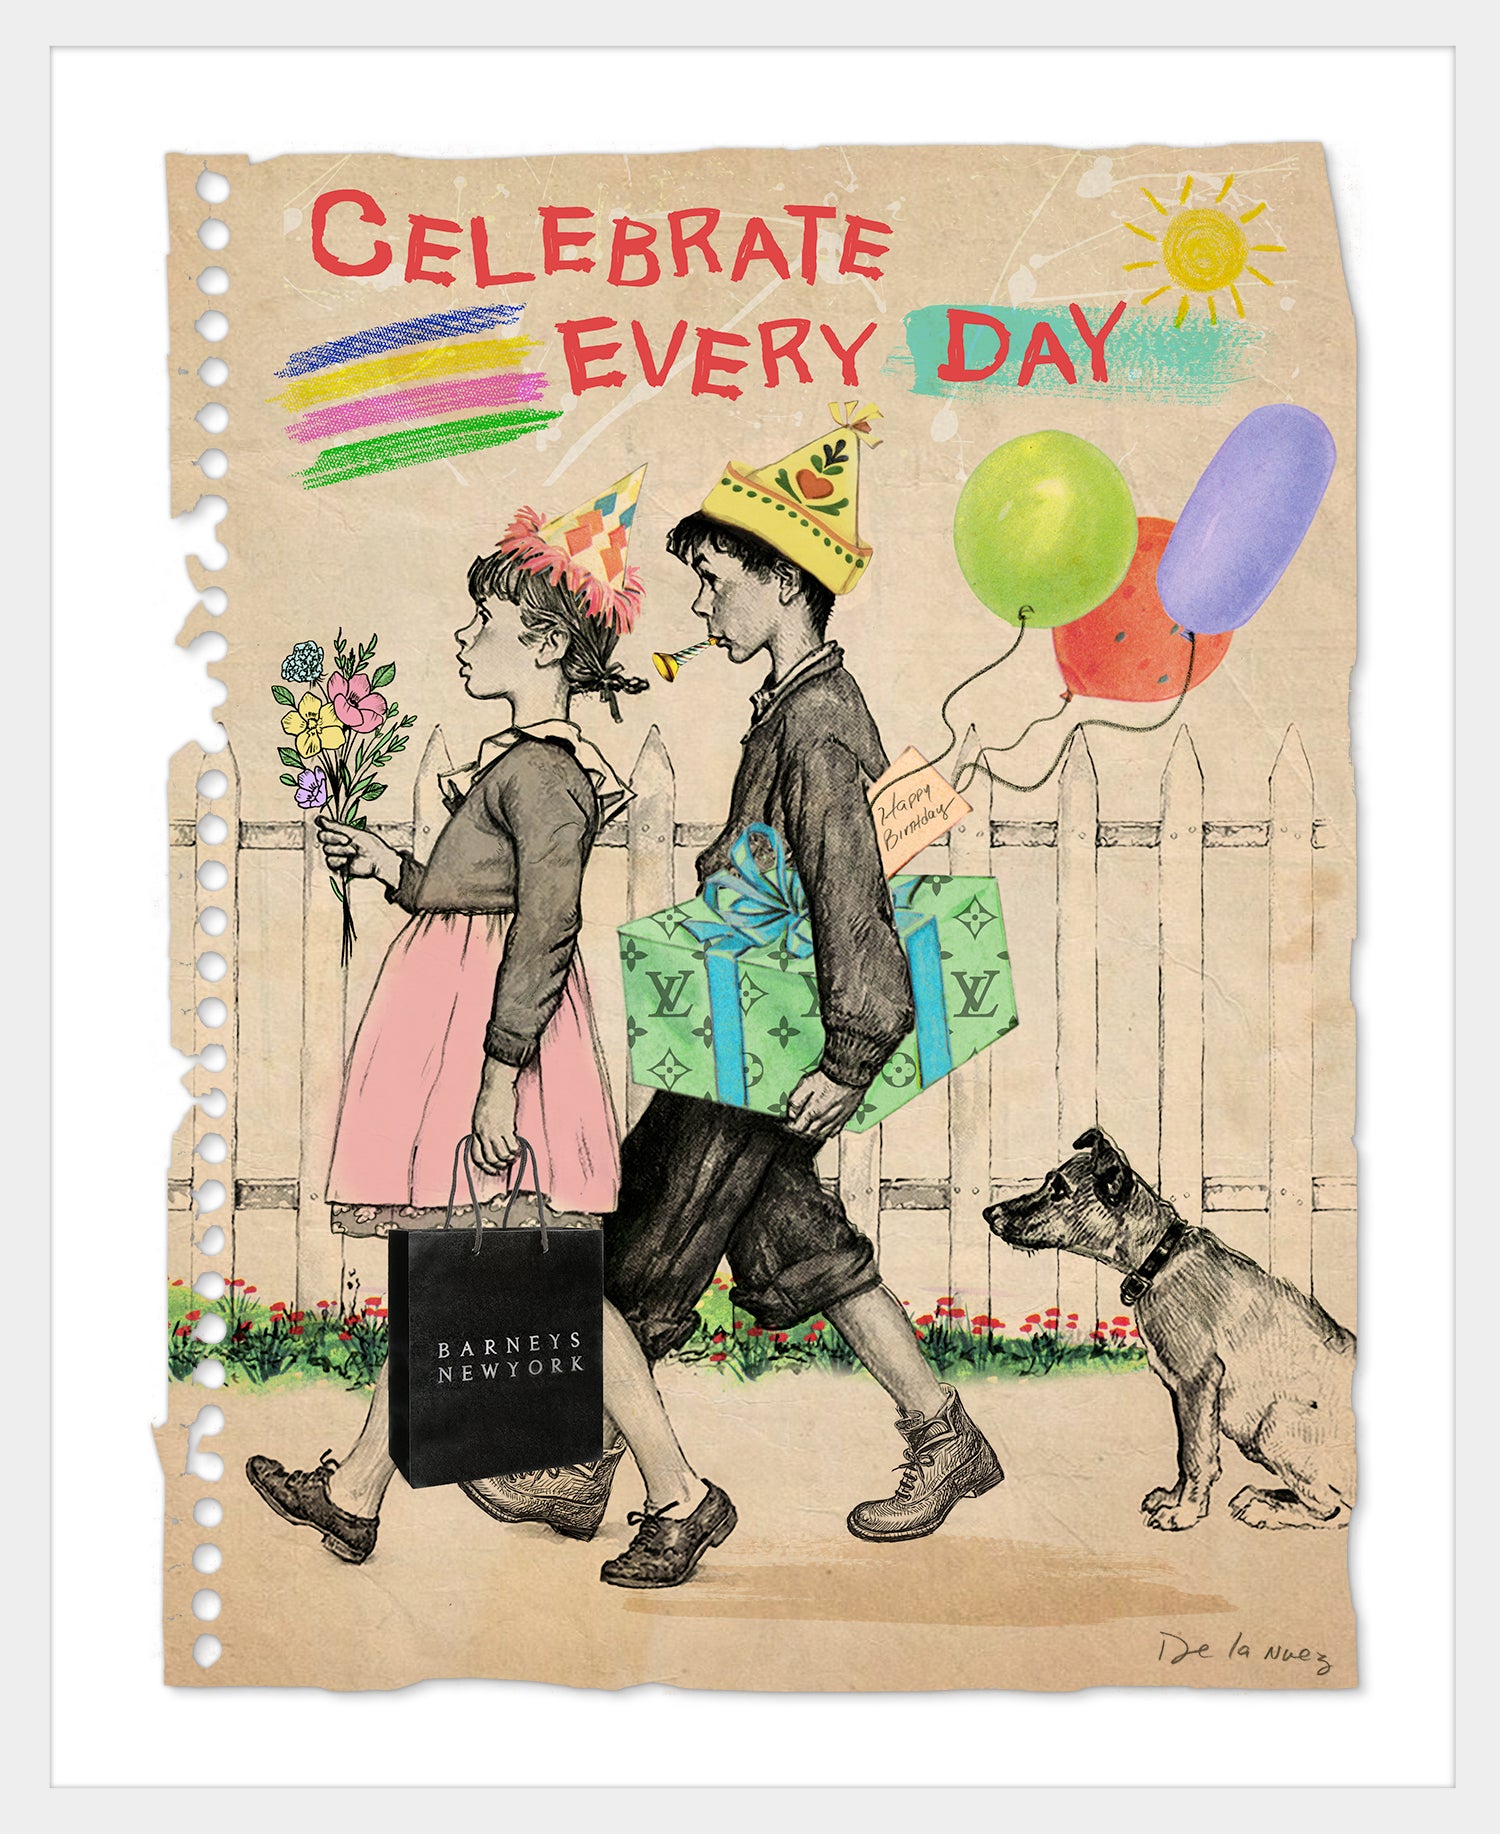 Celebrate Every Day Mixed Media - FRAMED, Signed